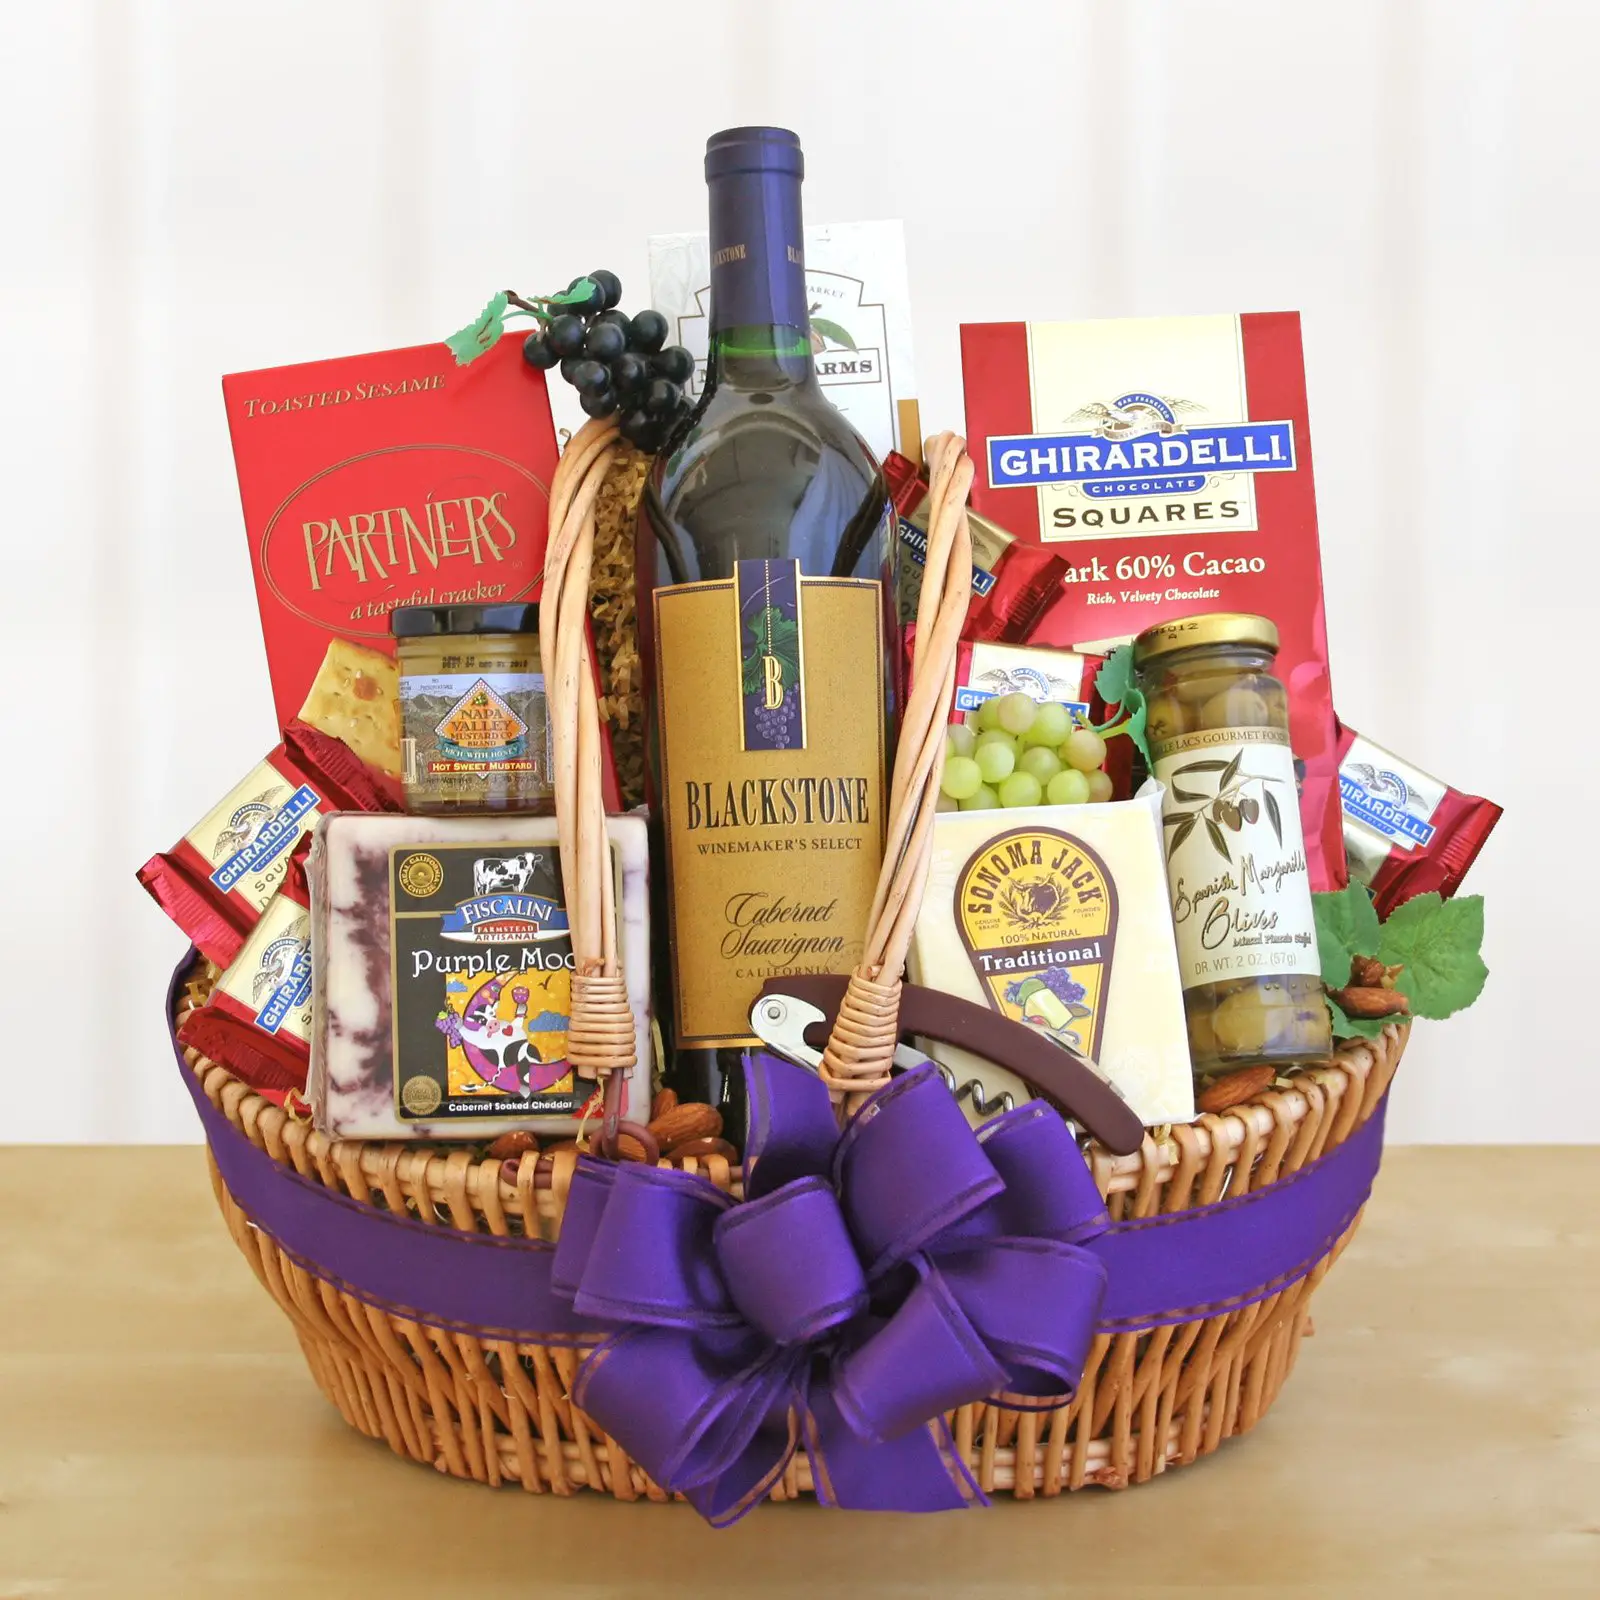 California Wine and Cheese Gift Basket at Hayneedle